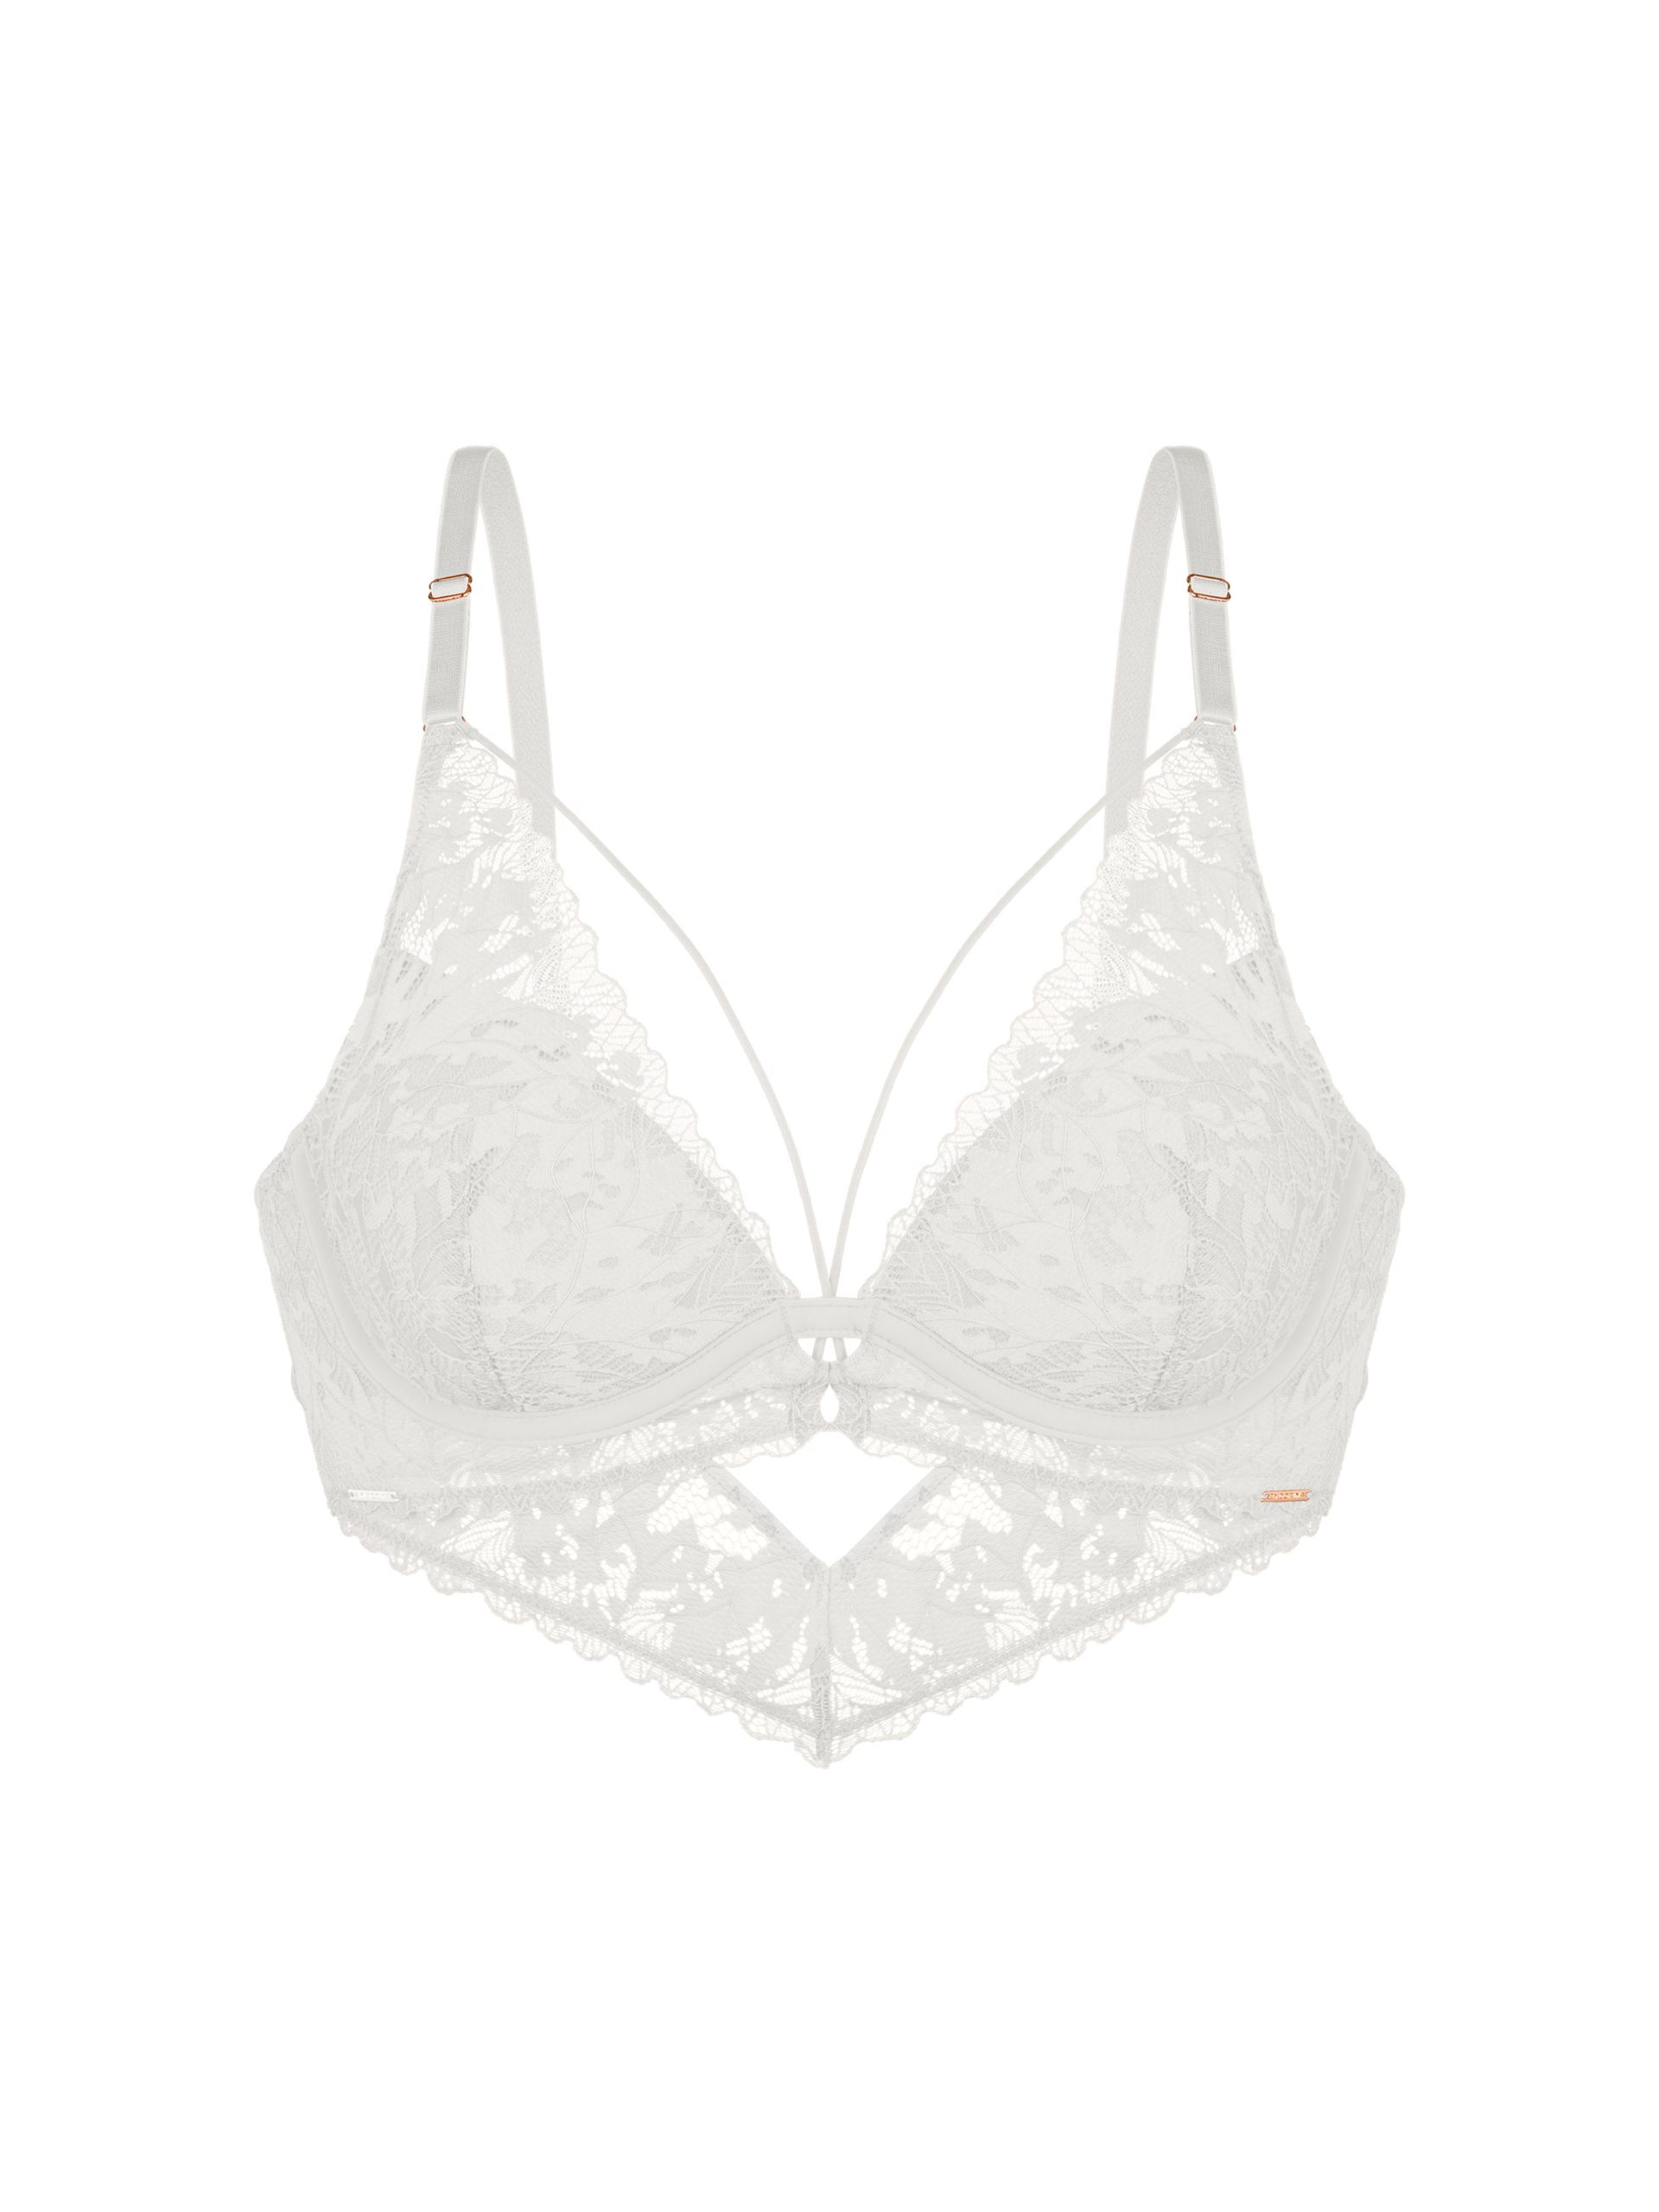 Dorina Jenner lace and fishnet lightly padded demi bra with lace